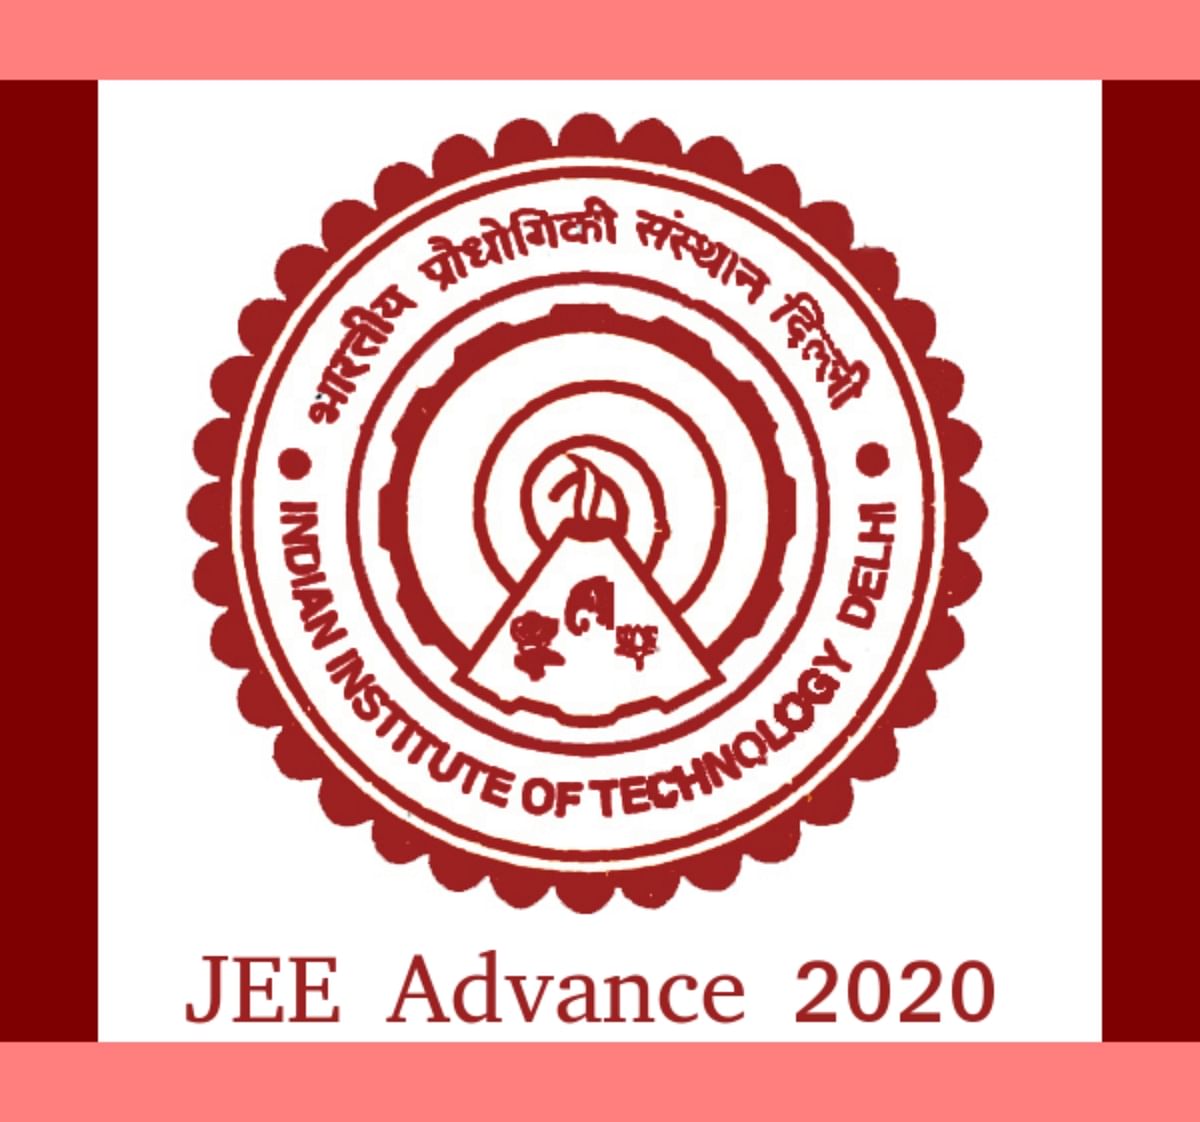 JEE Advanced 2020 Application Process Begins Today, Detailed Information Here